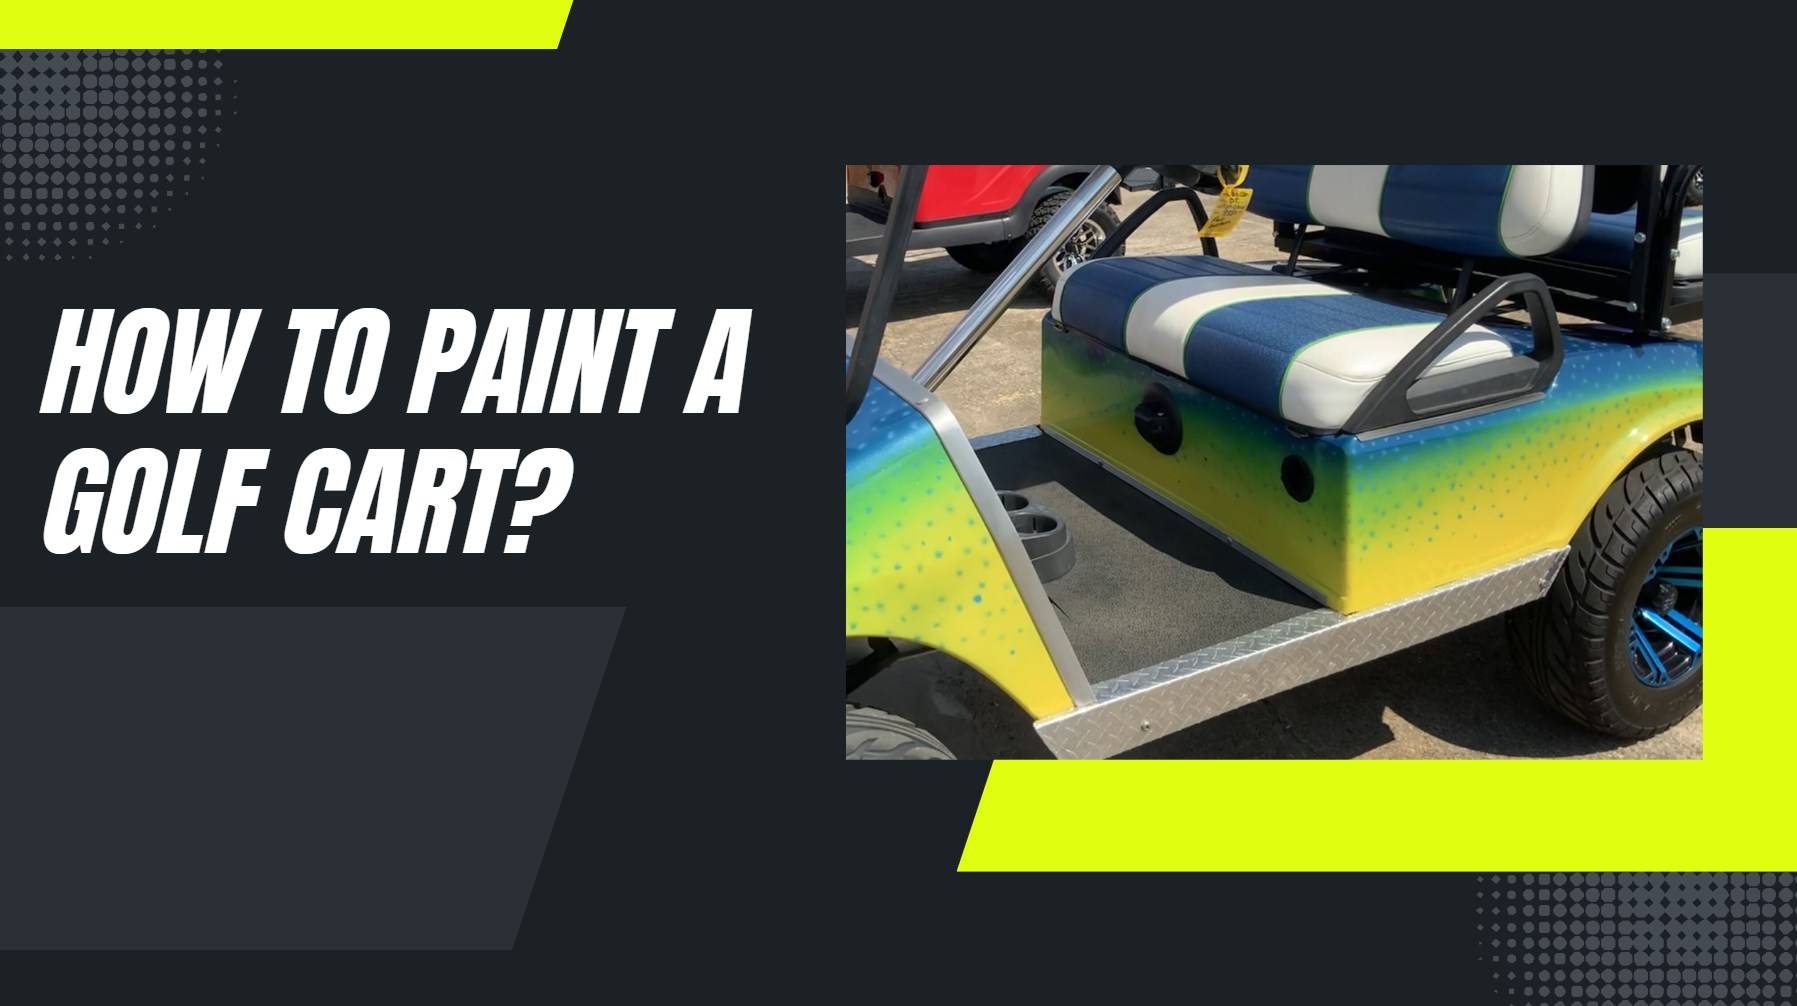 How to paint a golf cart? How Do Golf Carts Operate?